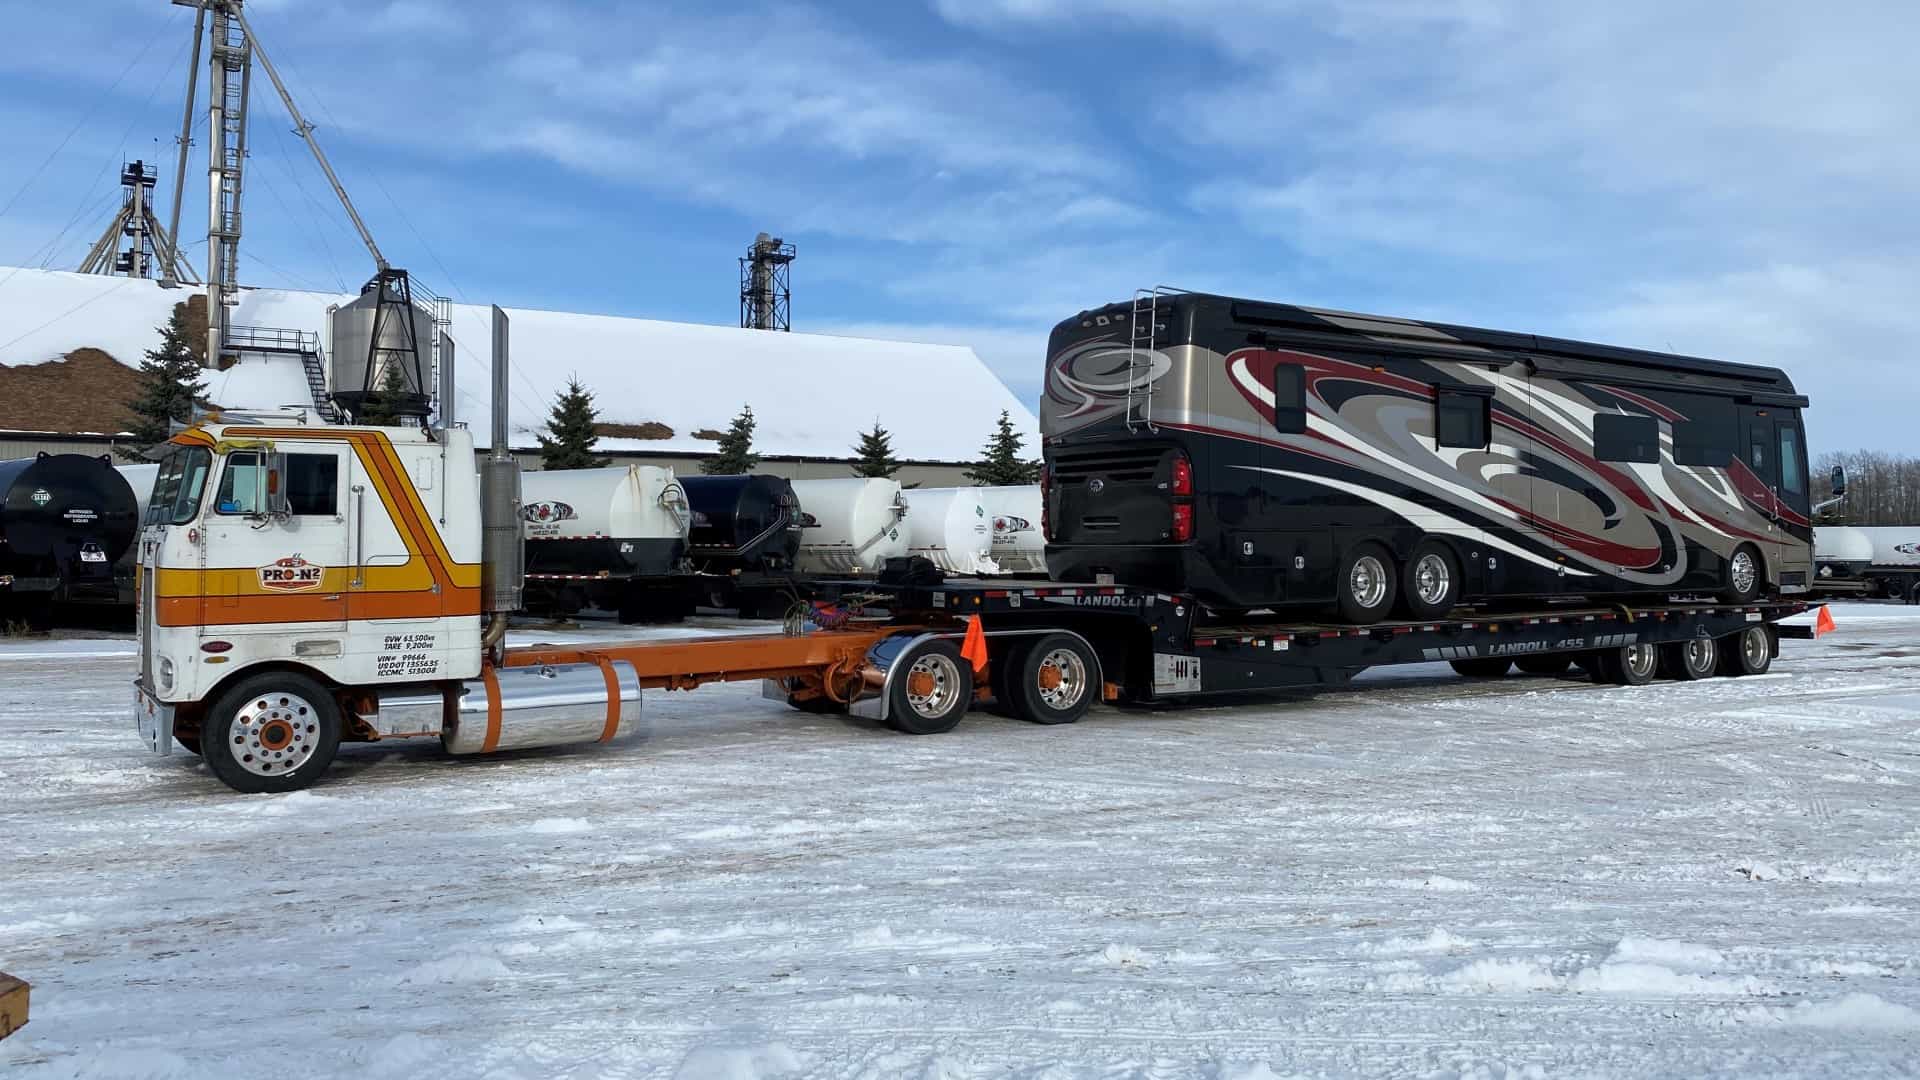 A ProN2 truck hauling an RV on a flatbed